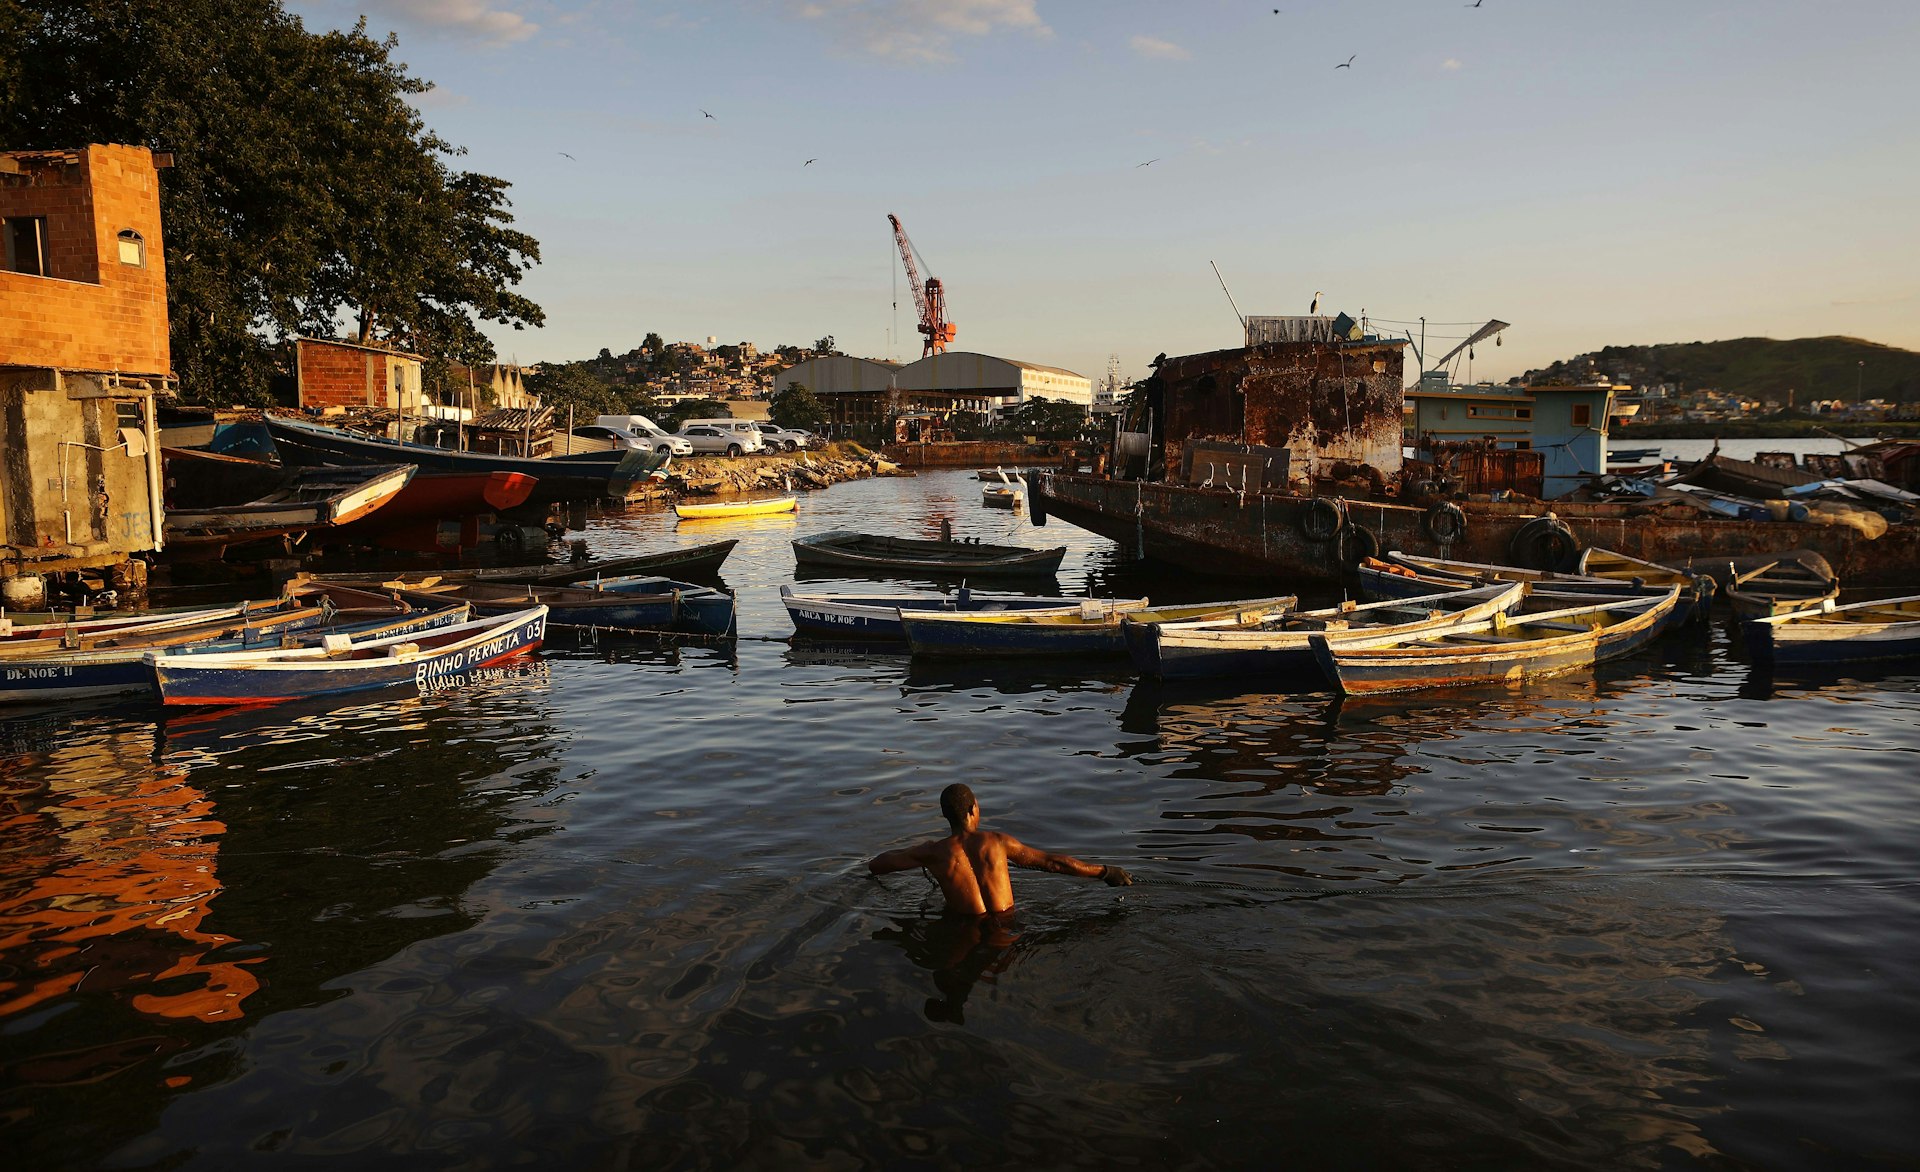  fisherman helps tow a boat to shore along the coast of the polluted Guanabara Bay, Rio de Janeiro, Brazil